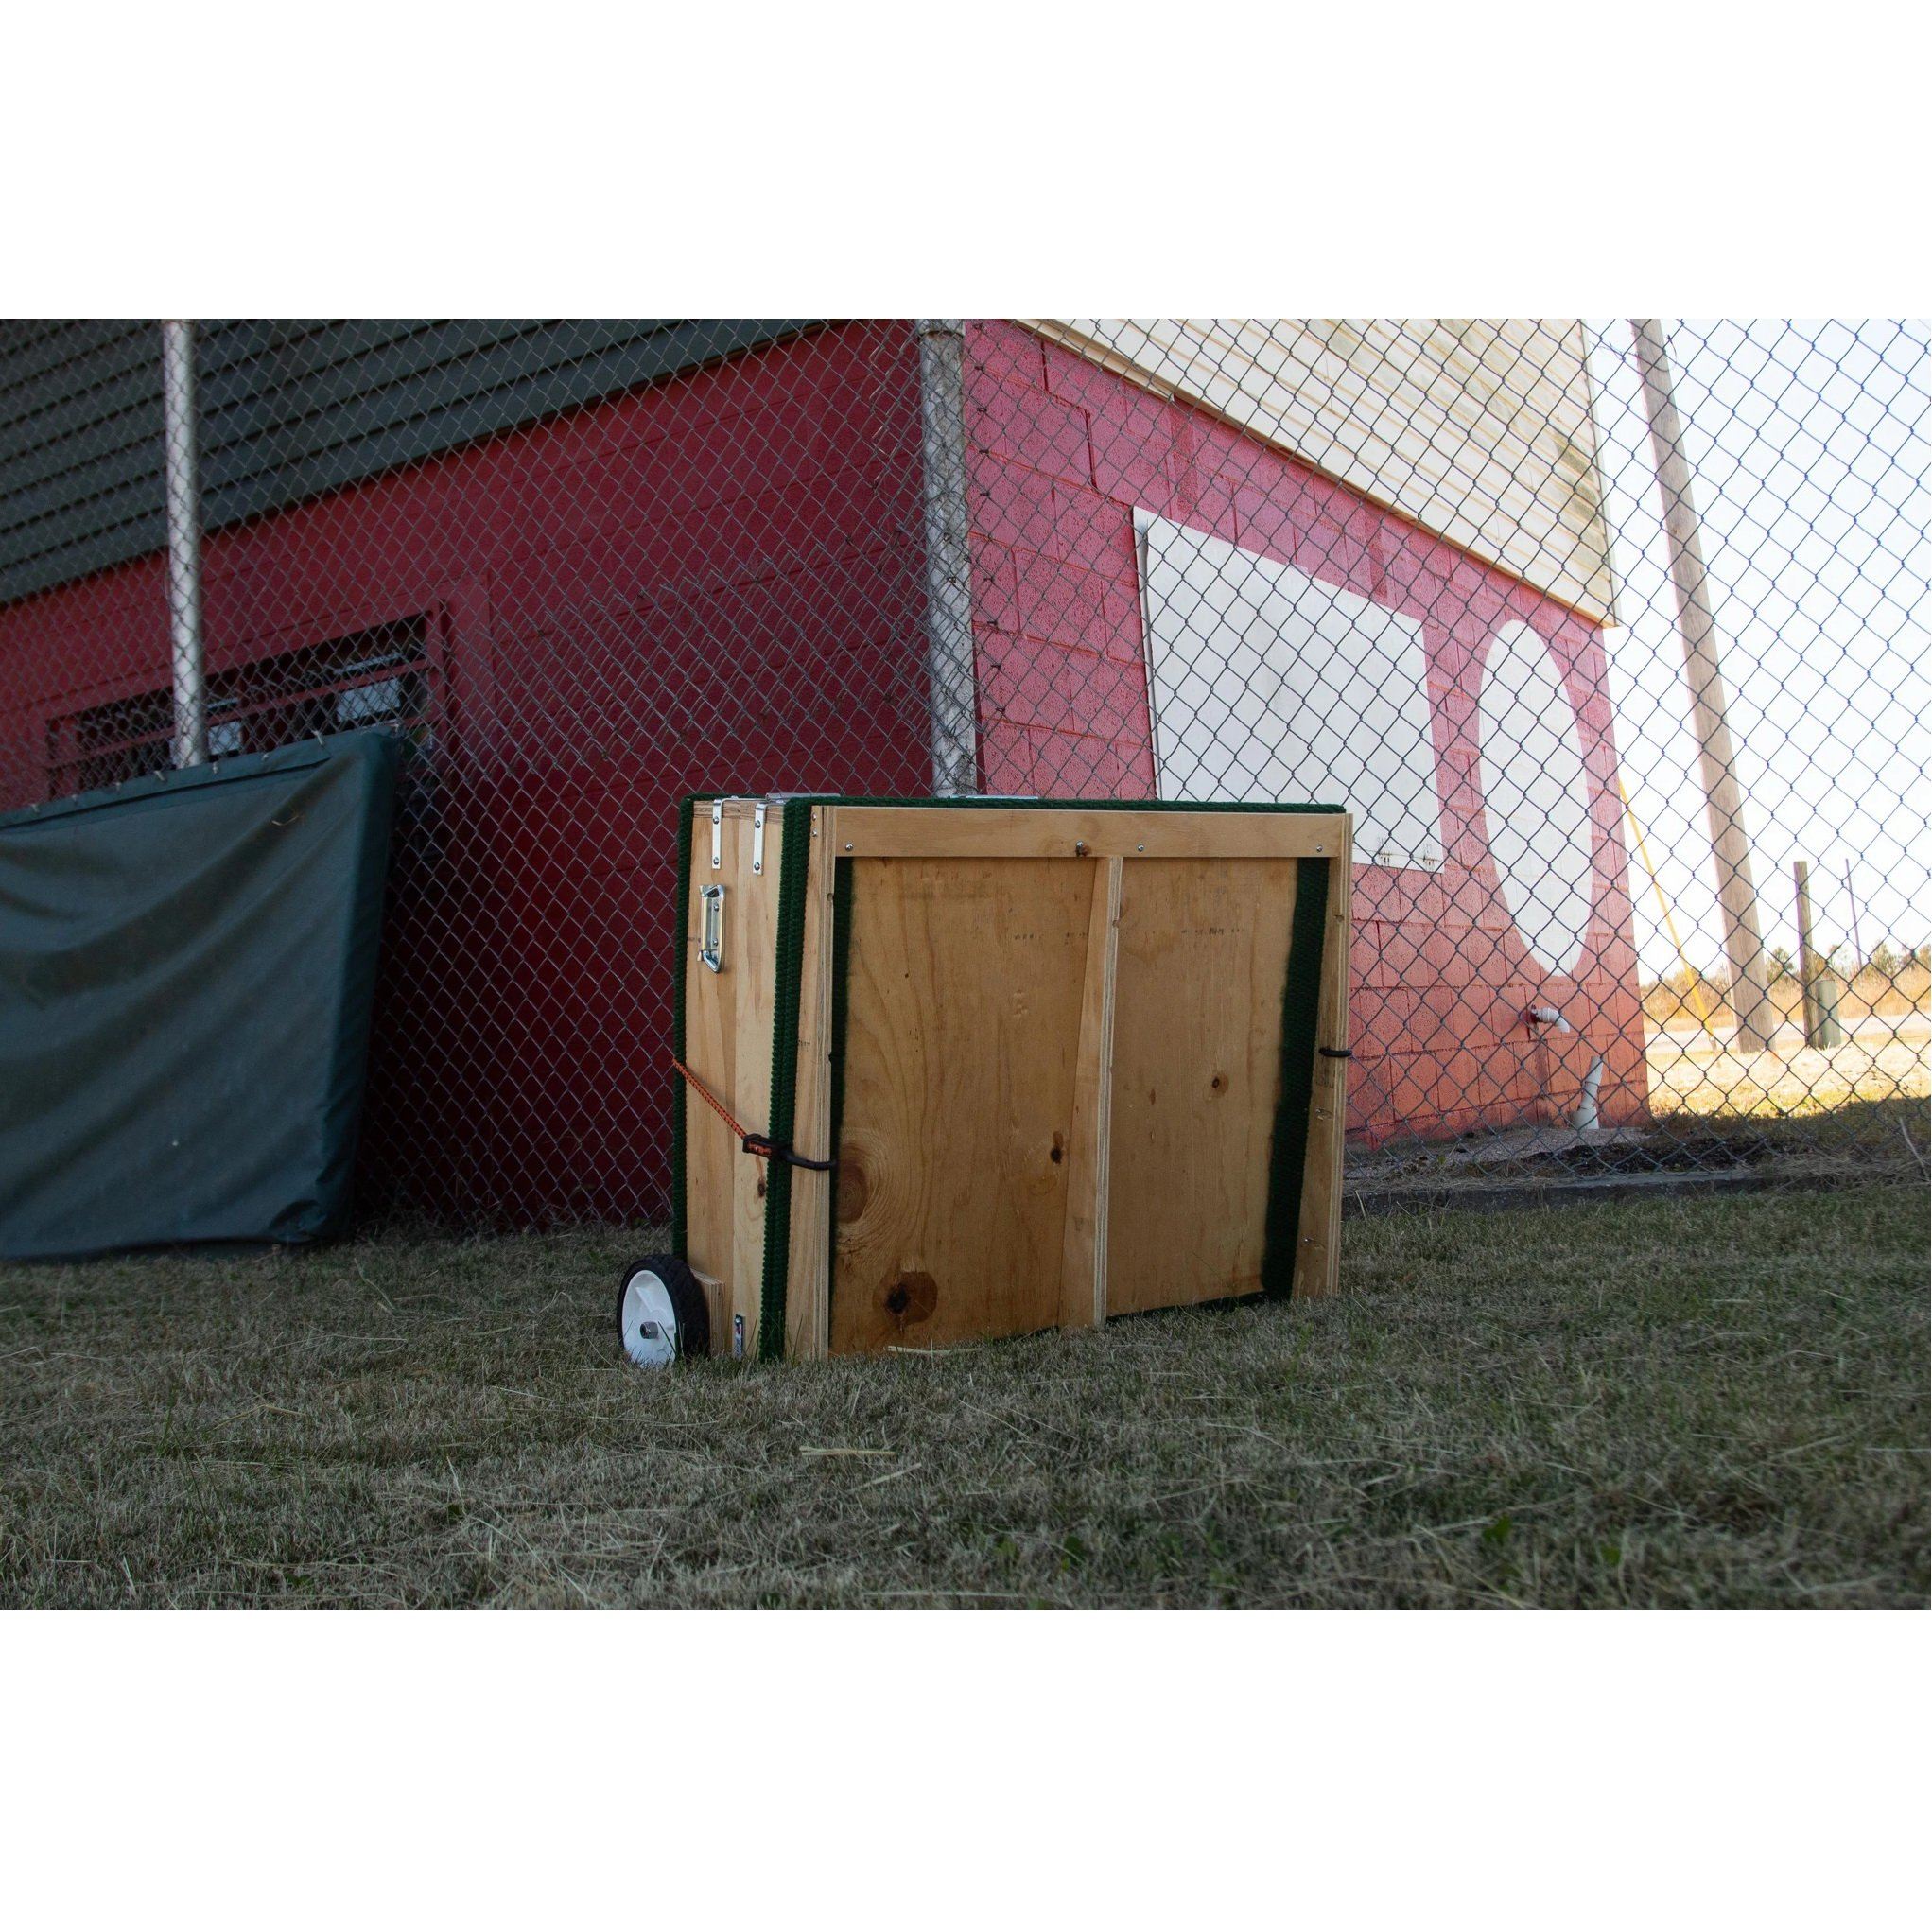 8" Intermediate Portable Practice Pitching Mound